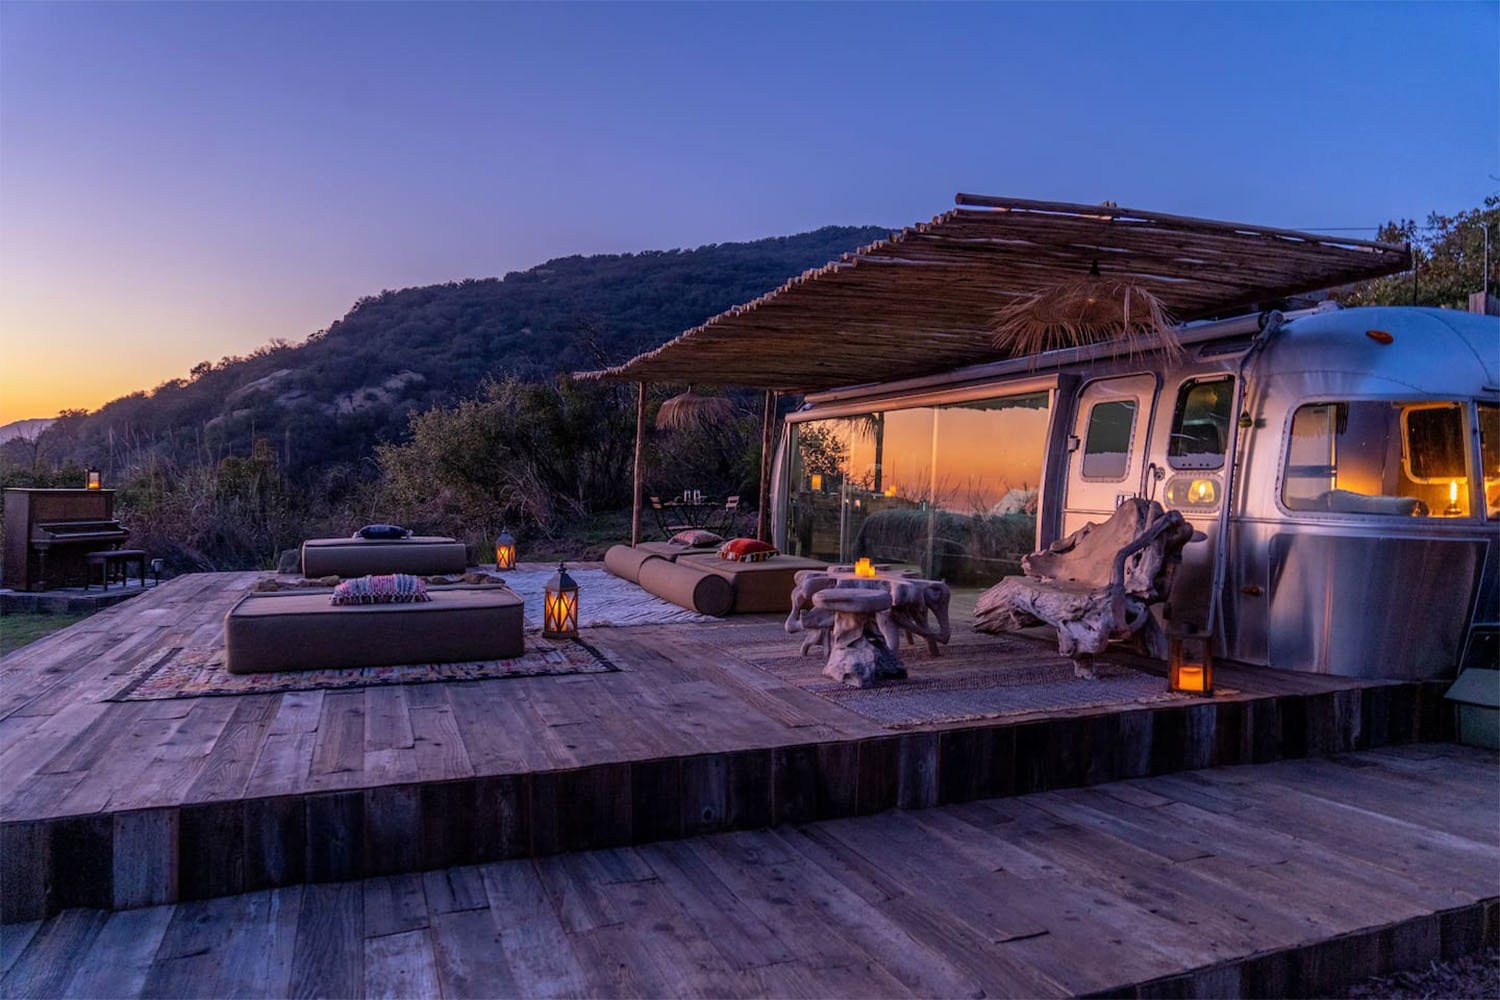 The 10 Best Airstreams to Rent on Airbnb